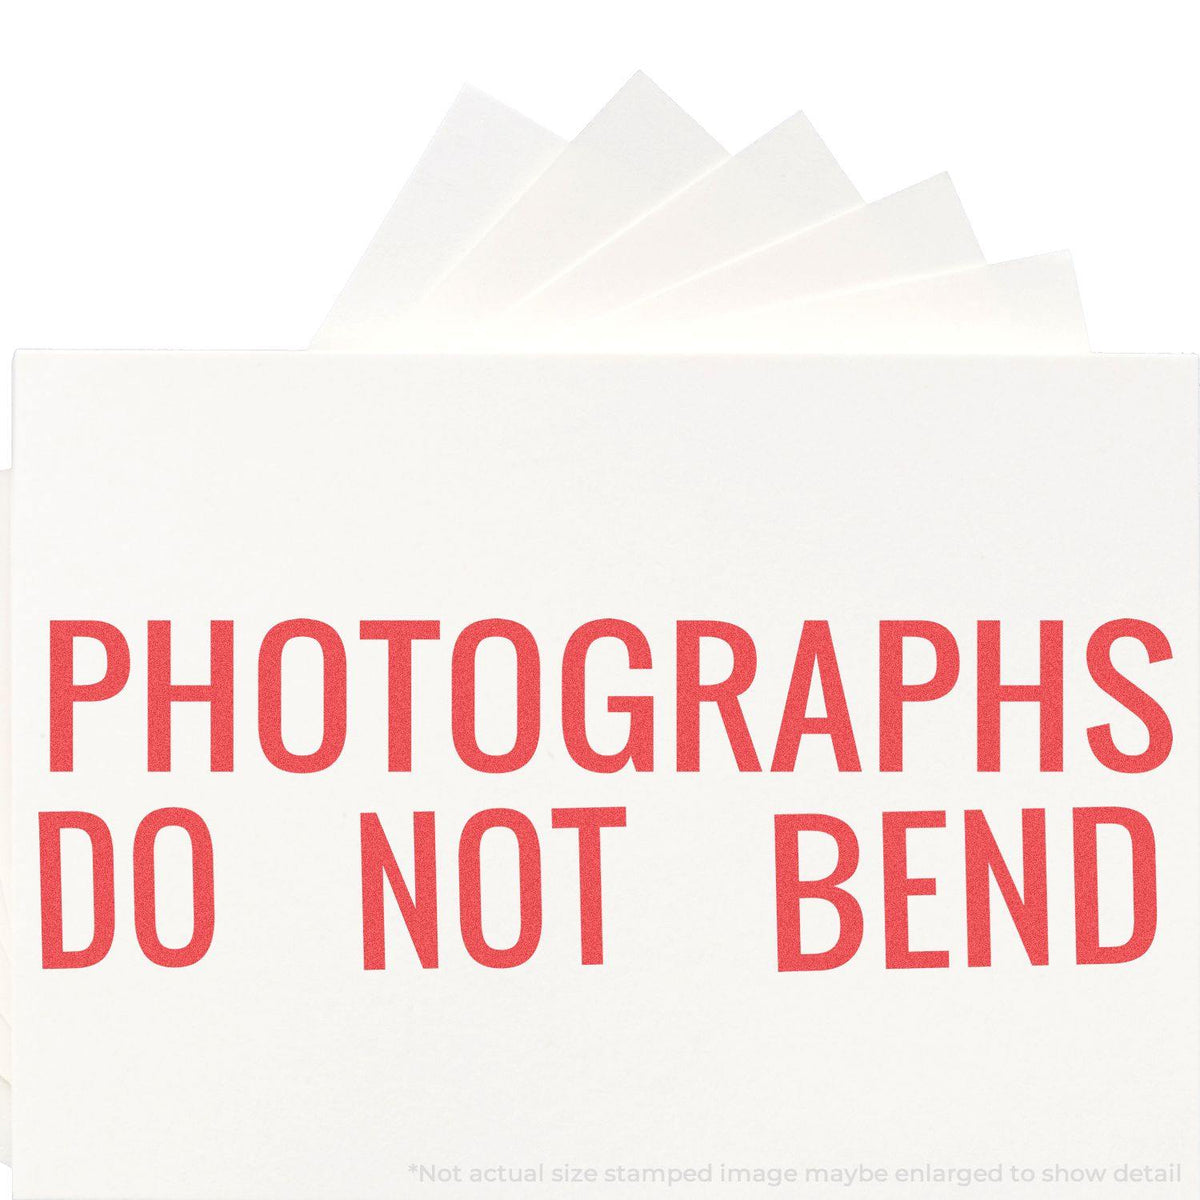 In Use Photo of Jumbo Photographs Do Not Bend Xstamper Stamp